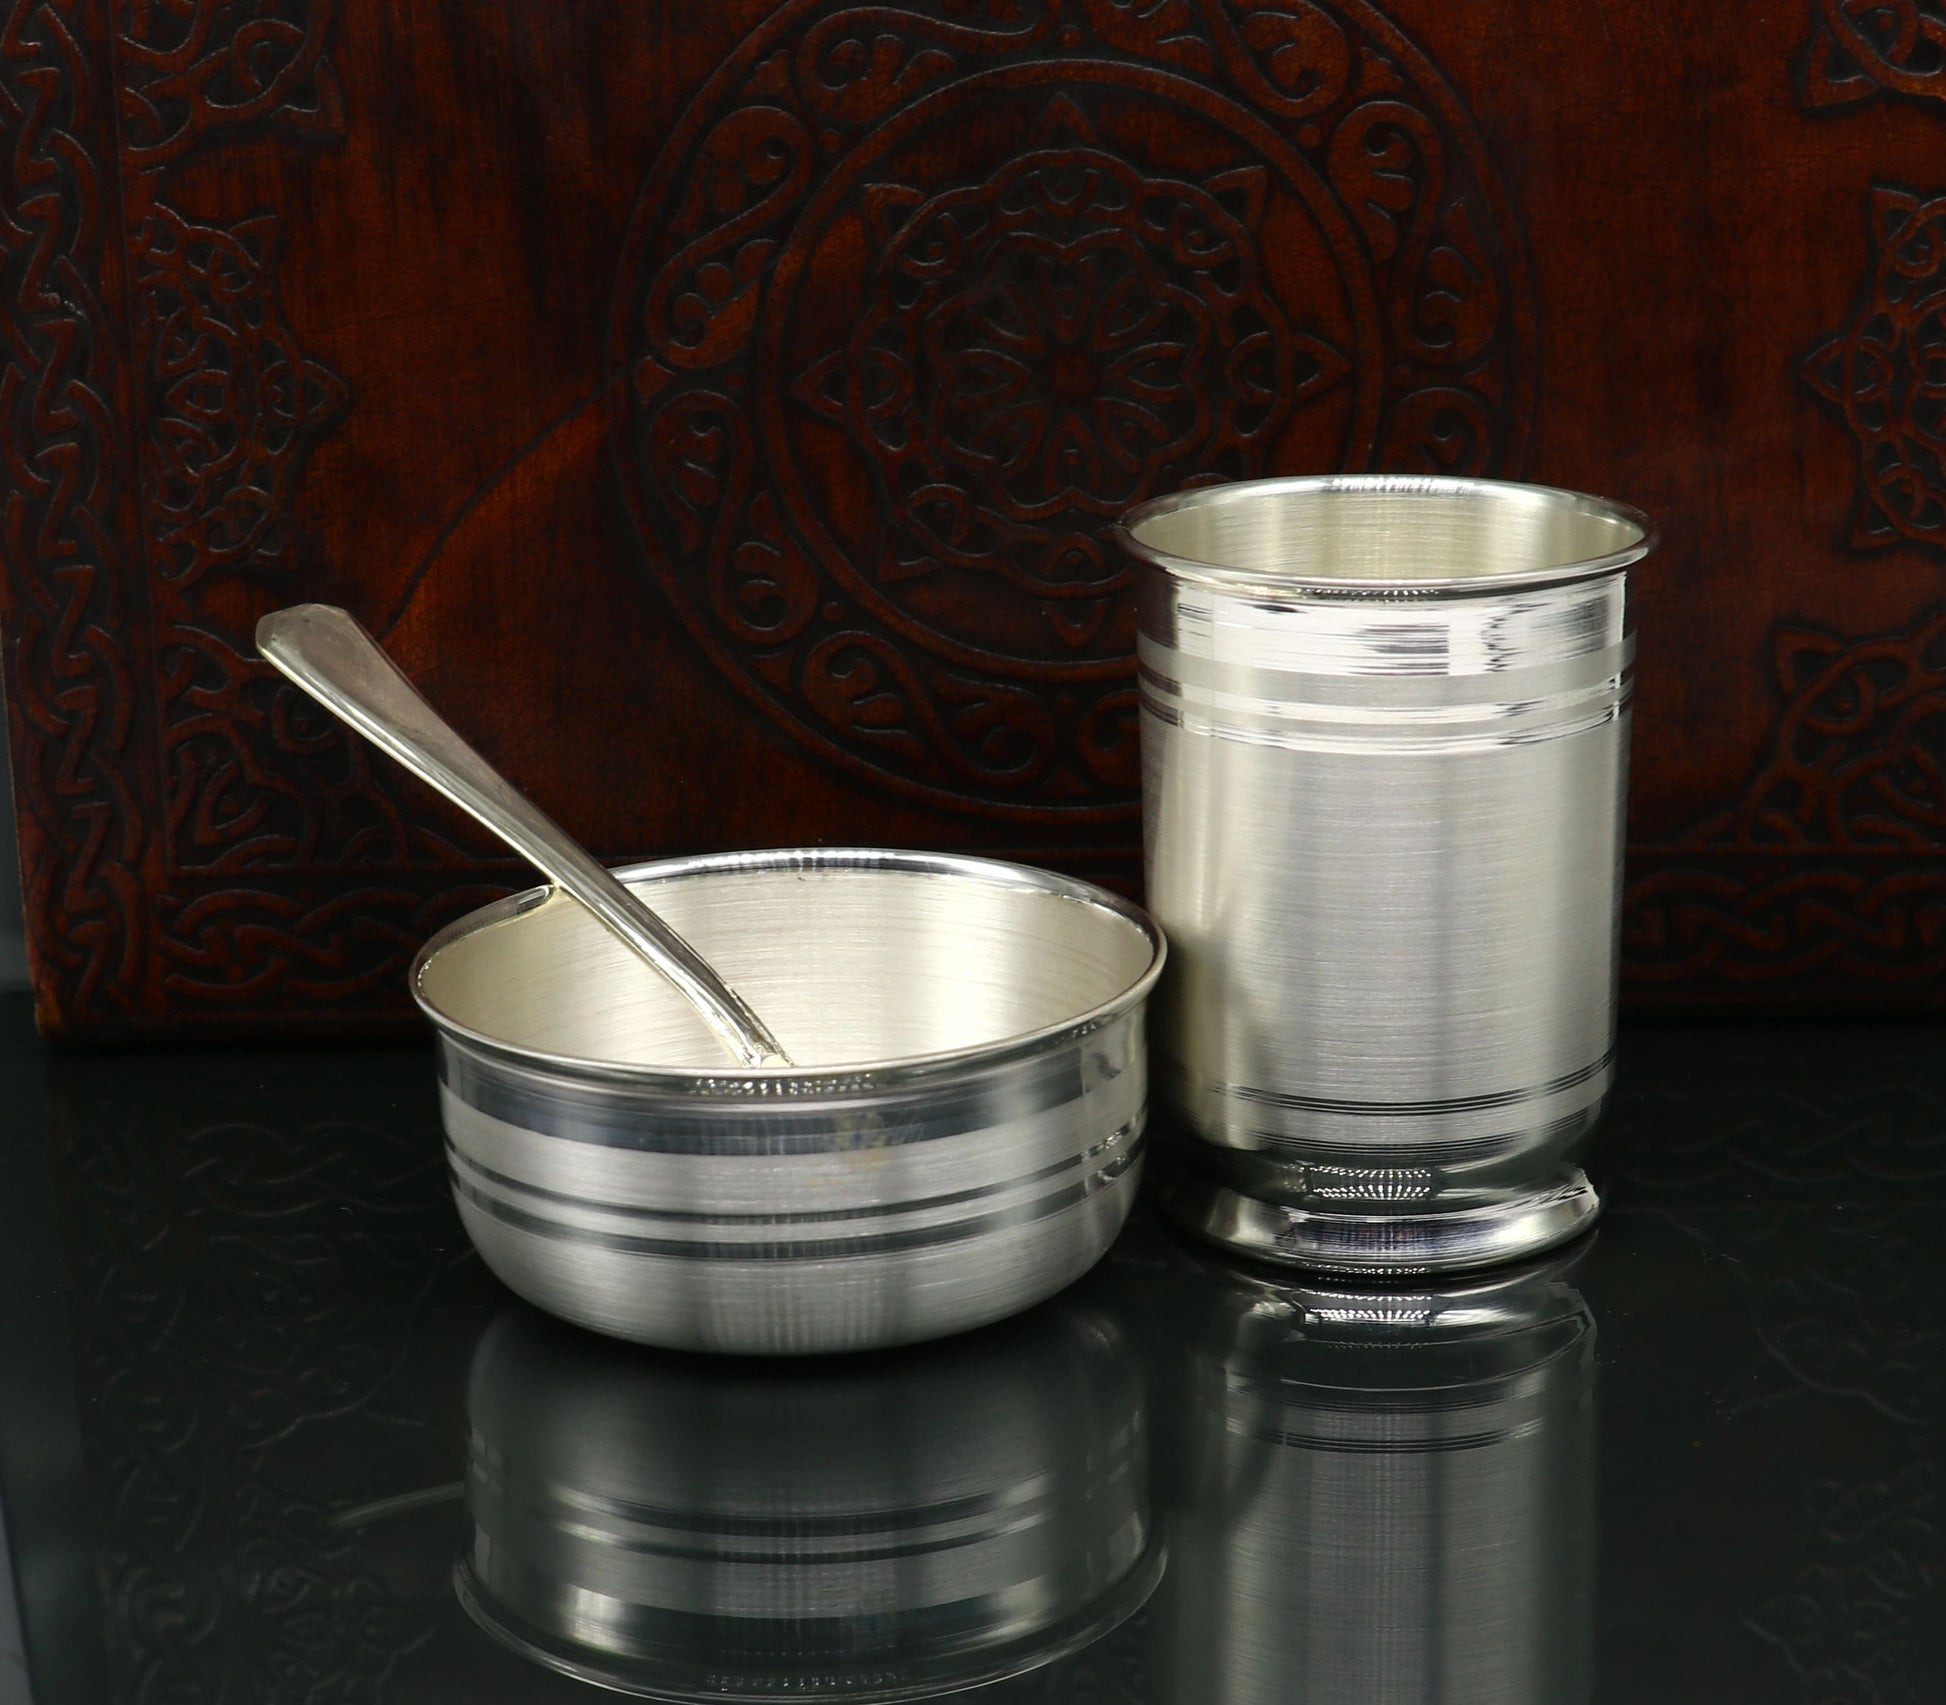 999 pure silver combo bowl and Water/milk tumbler, silver vessel, silver baby utensils, silver kids food article, gifting utensils sv138 - TRIBAL ORNAMENTS